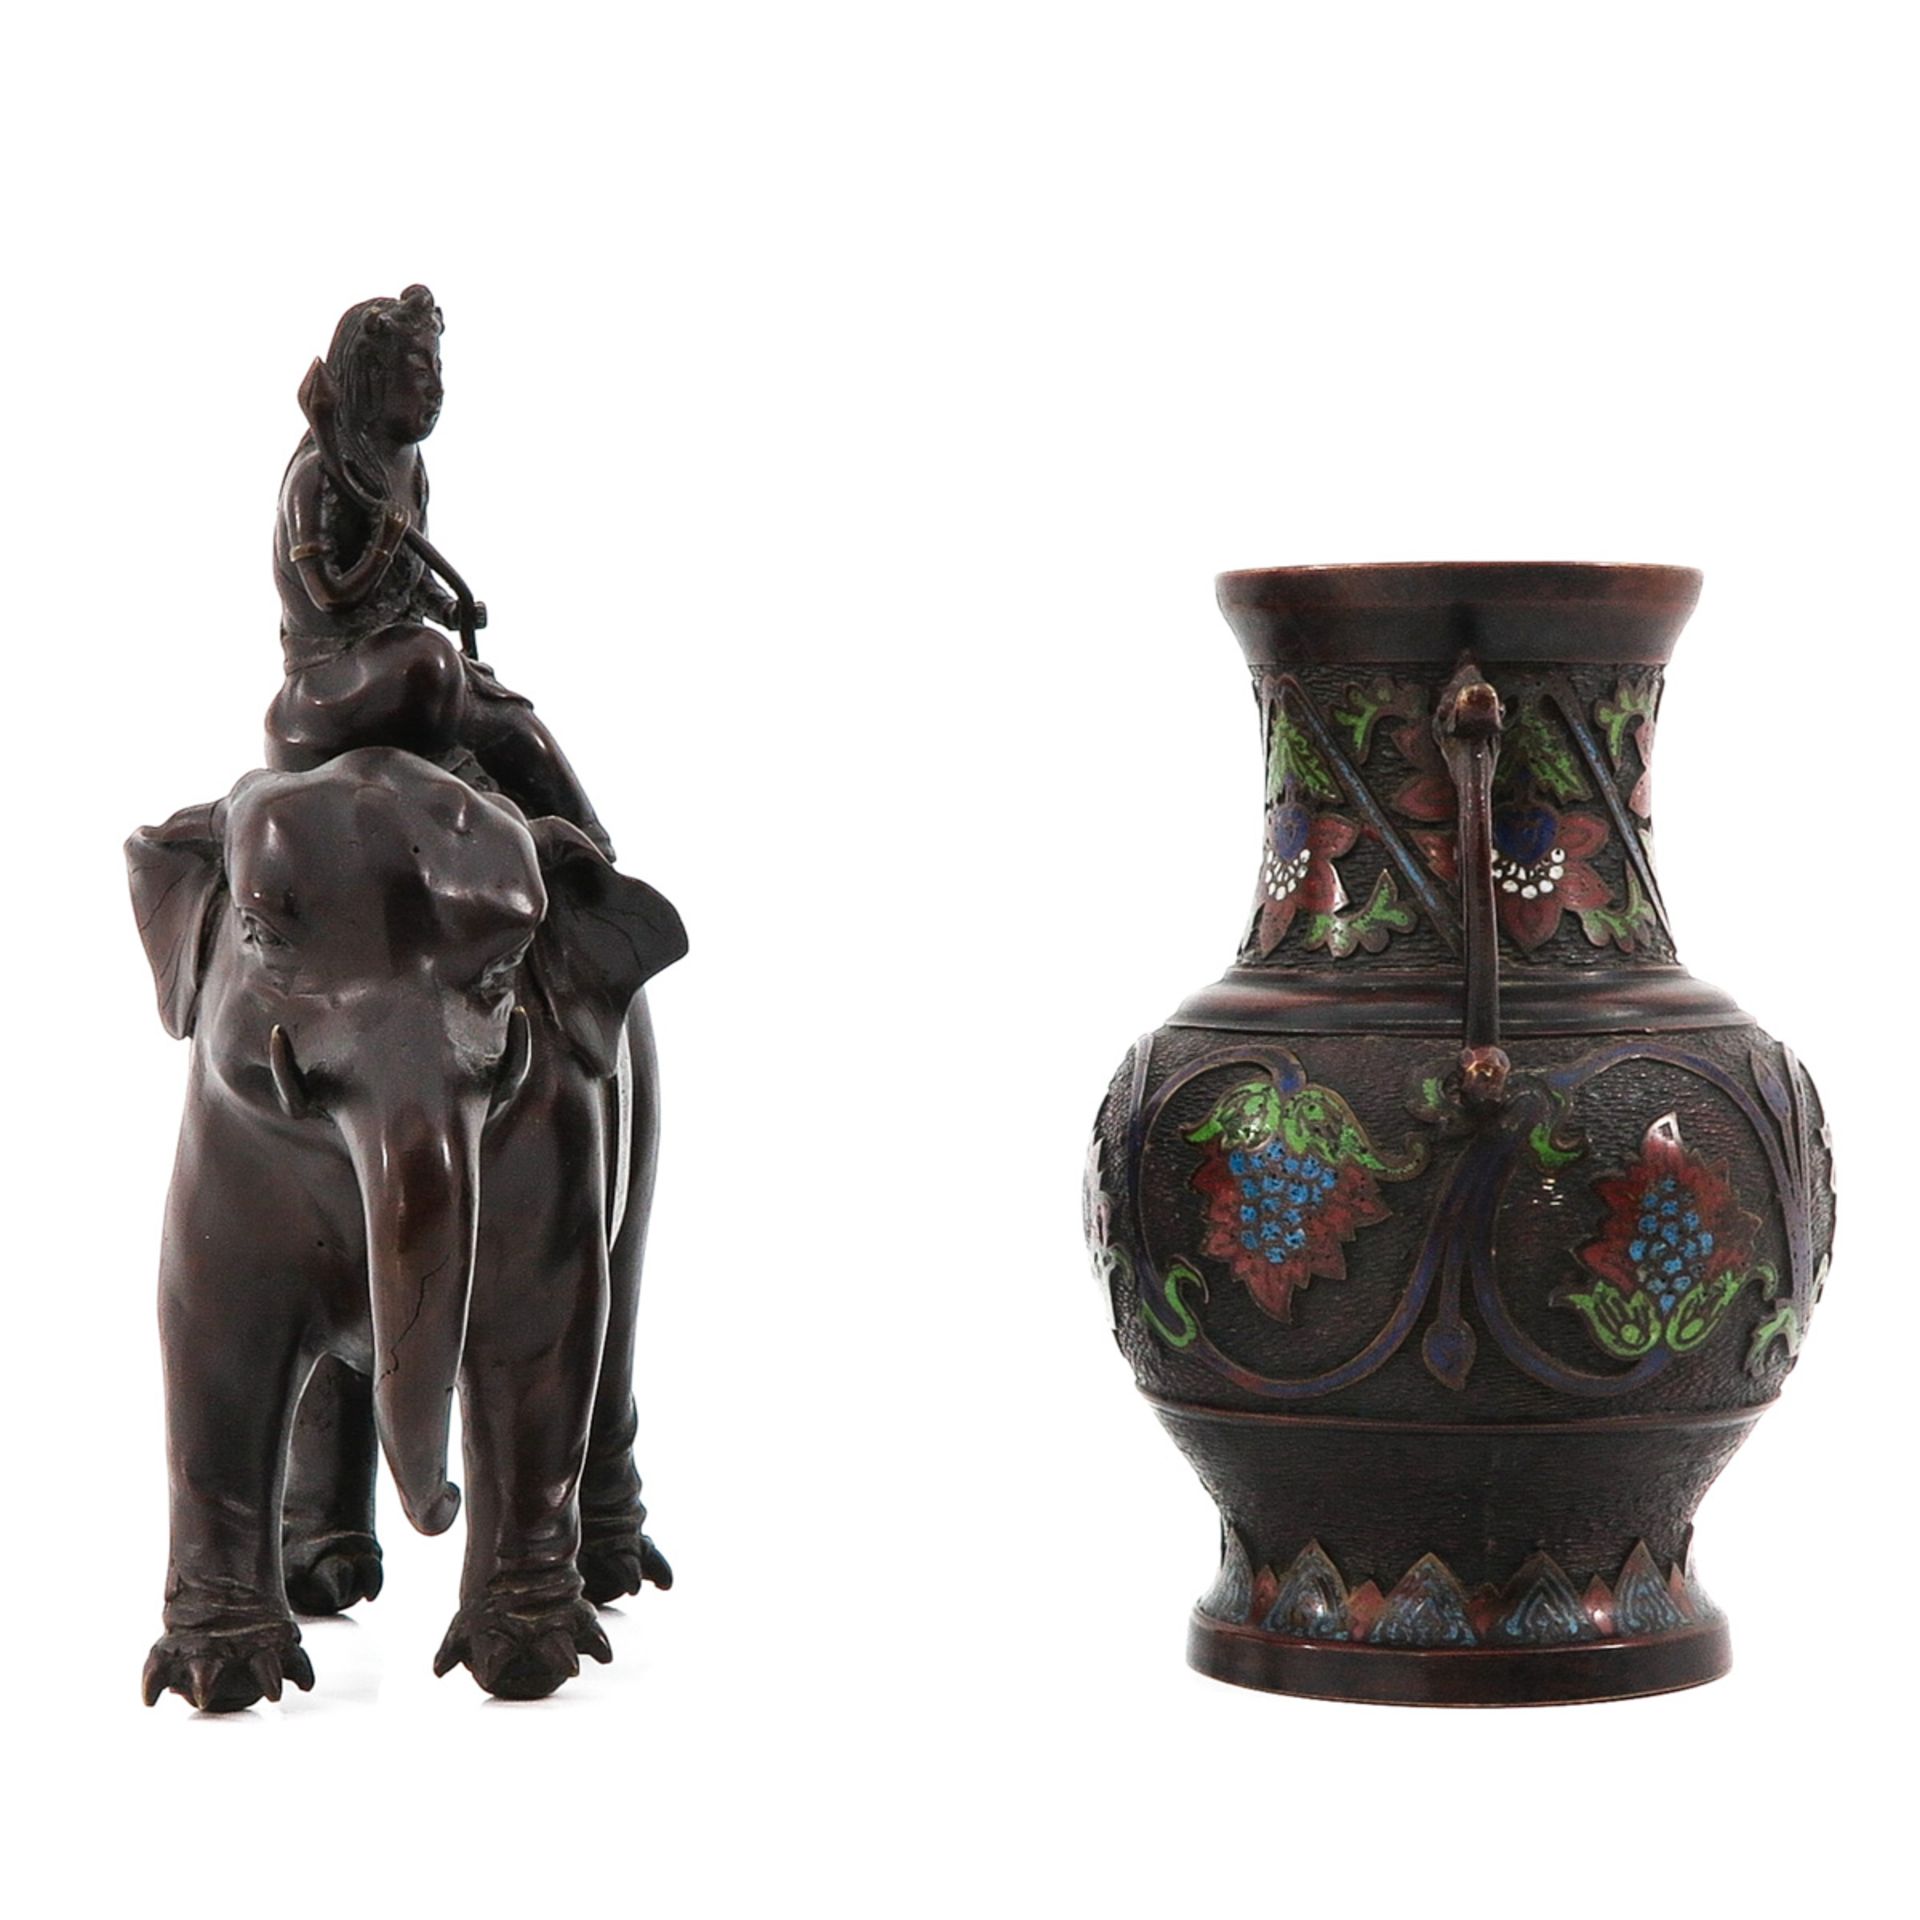 A Cloisonne Sculpture and Vase - Image 4 of 10